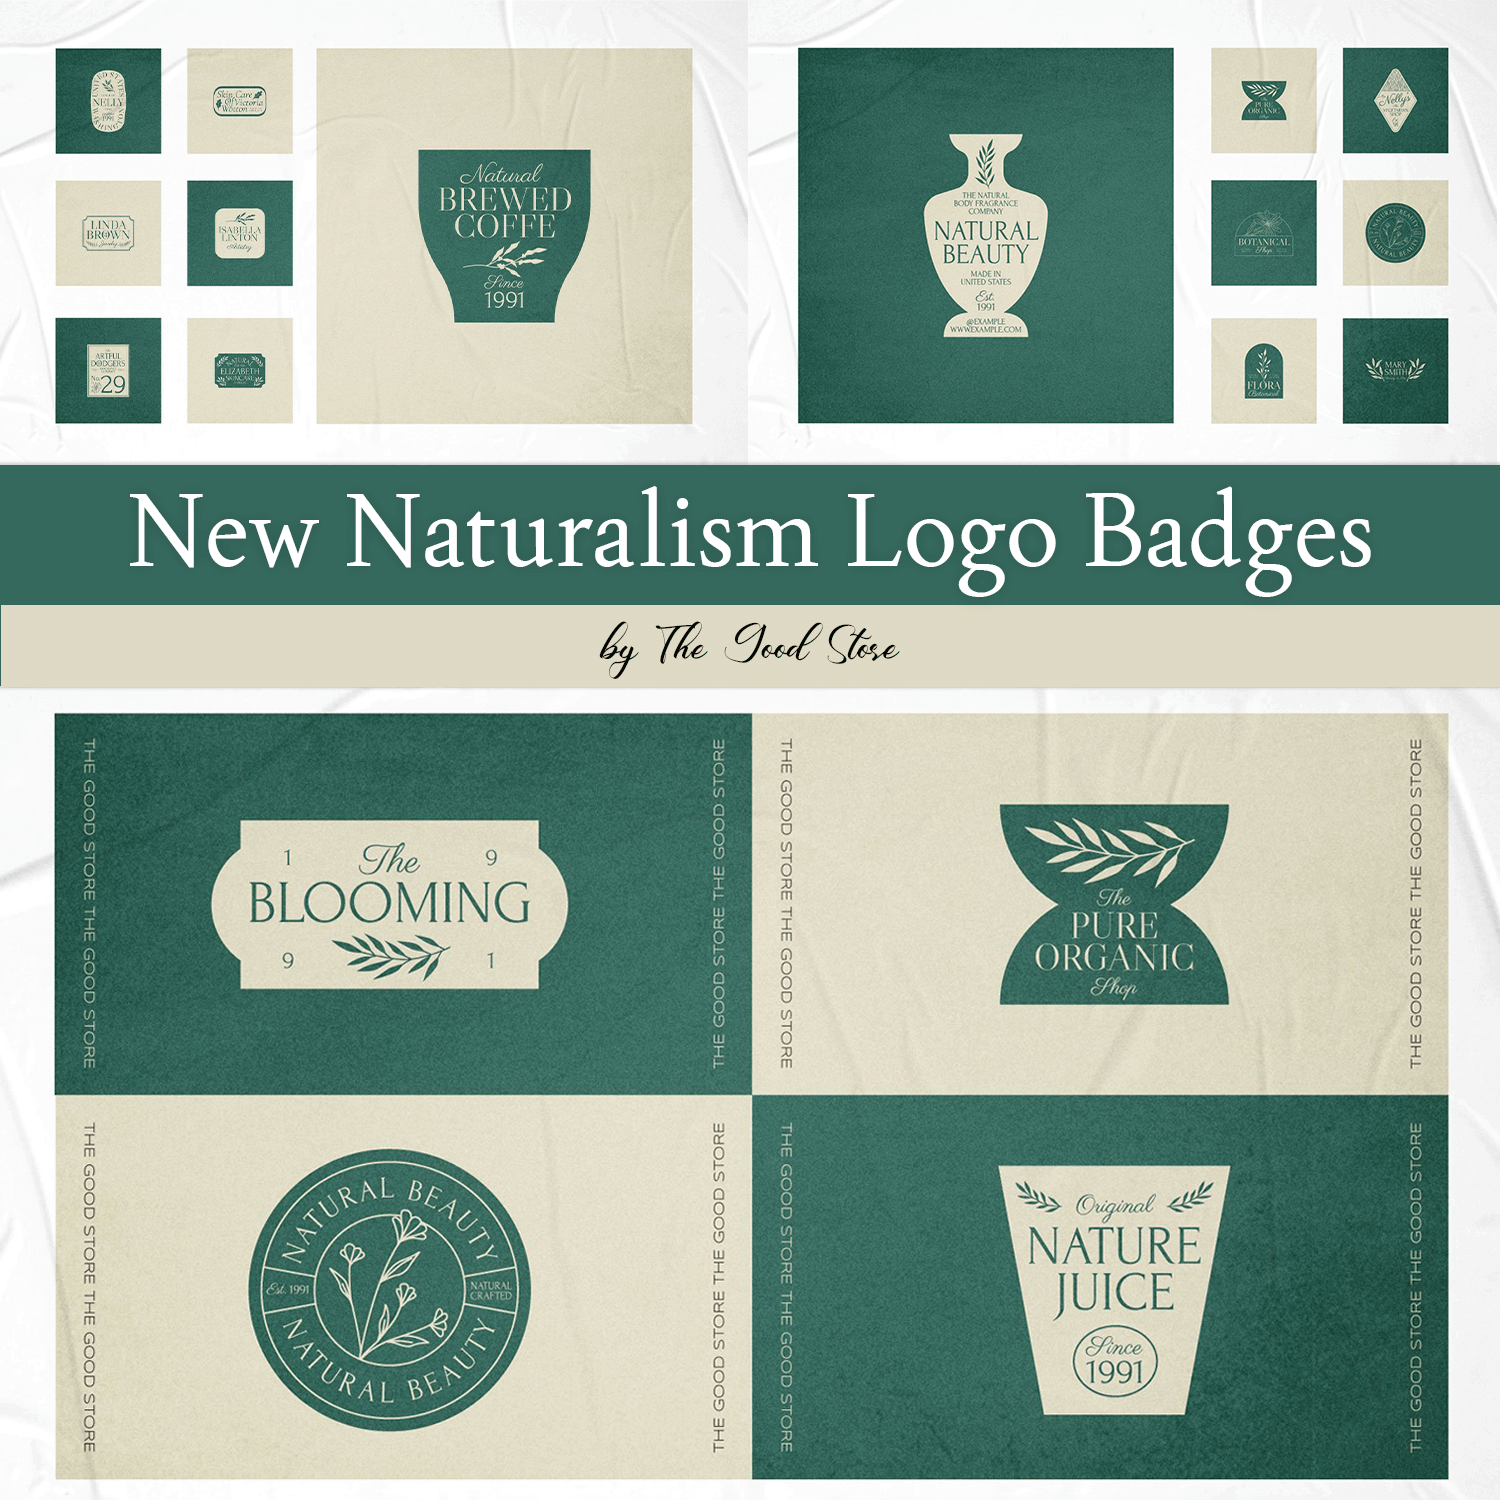 Natural brewed coffee, natural beauty, original nature juice and other uses of new naturalism logo badges.